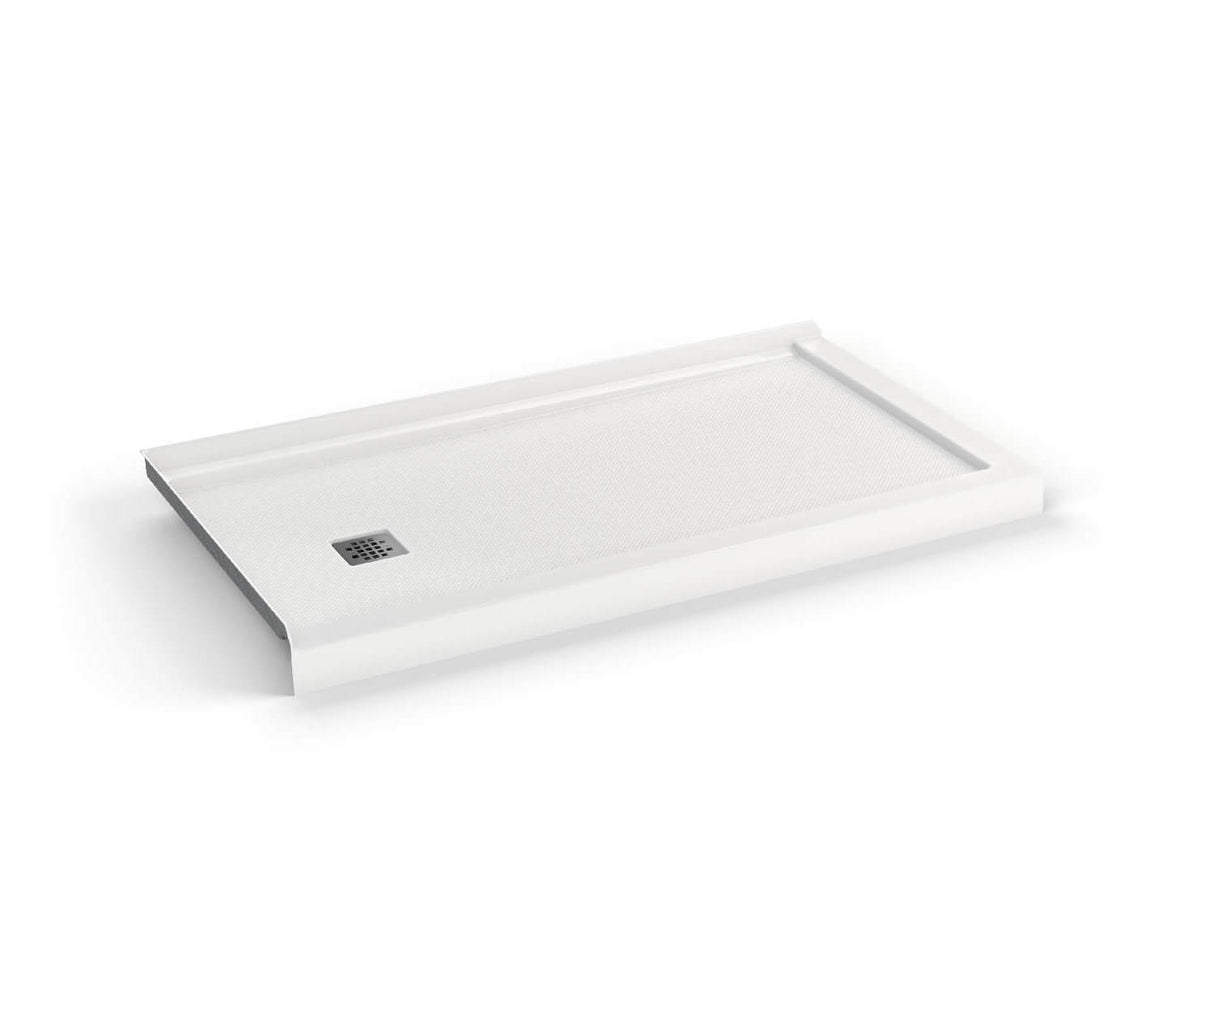 MAAX 420035-542-001-100 B3Square 6034 Acrylic Corner Left Shower Base in White with Anti-slip Bottom with Left-Hand Drain